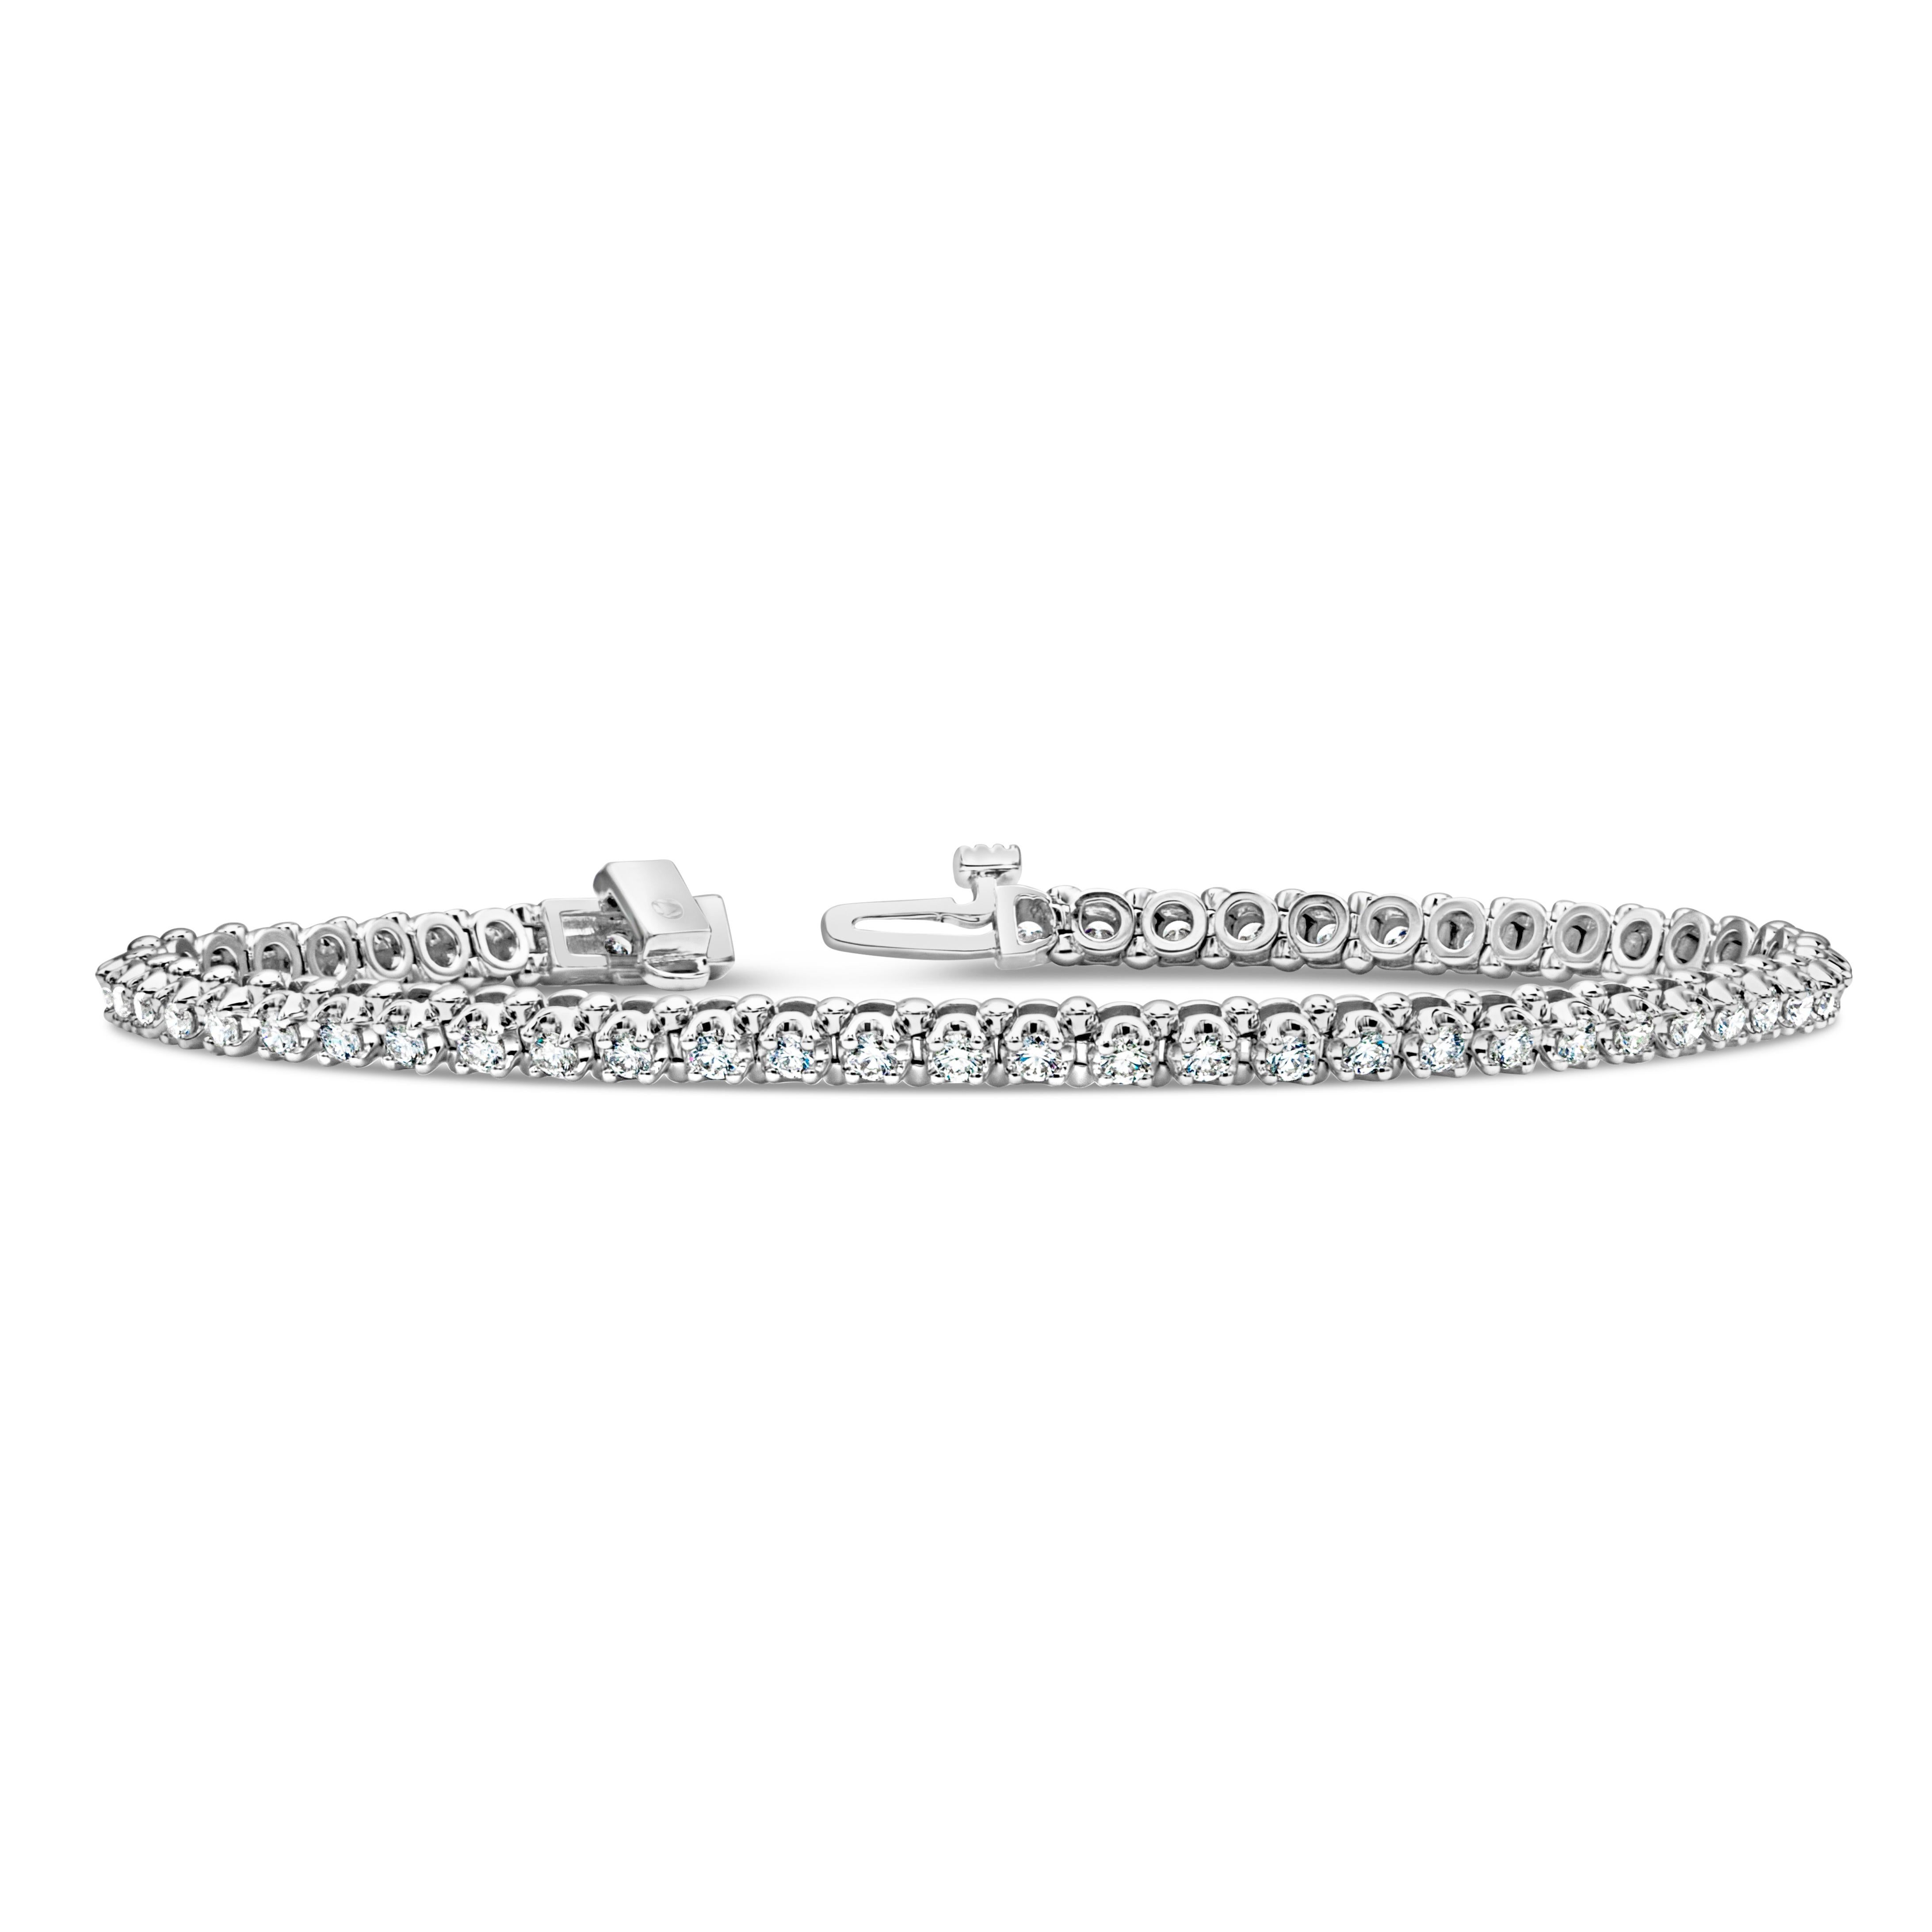 A classic tennis bracelet style, showcasing 55 round brilliant cut diamonds weighing 1.73 carats total with F color and VS2 clarity. Set on 14K white gold, 2 mm in width and 7 inches in length.

Roman Malakov is a custom house, specializing in